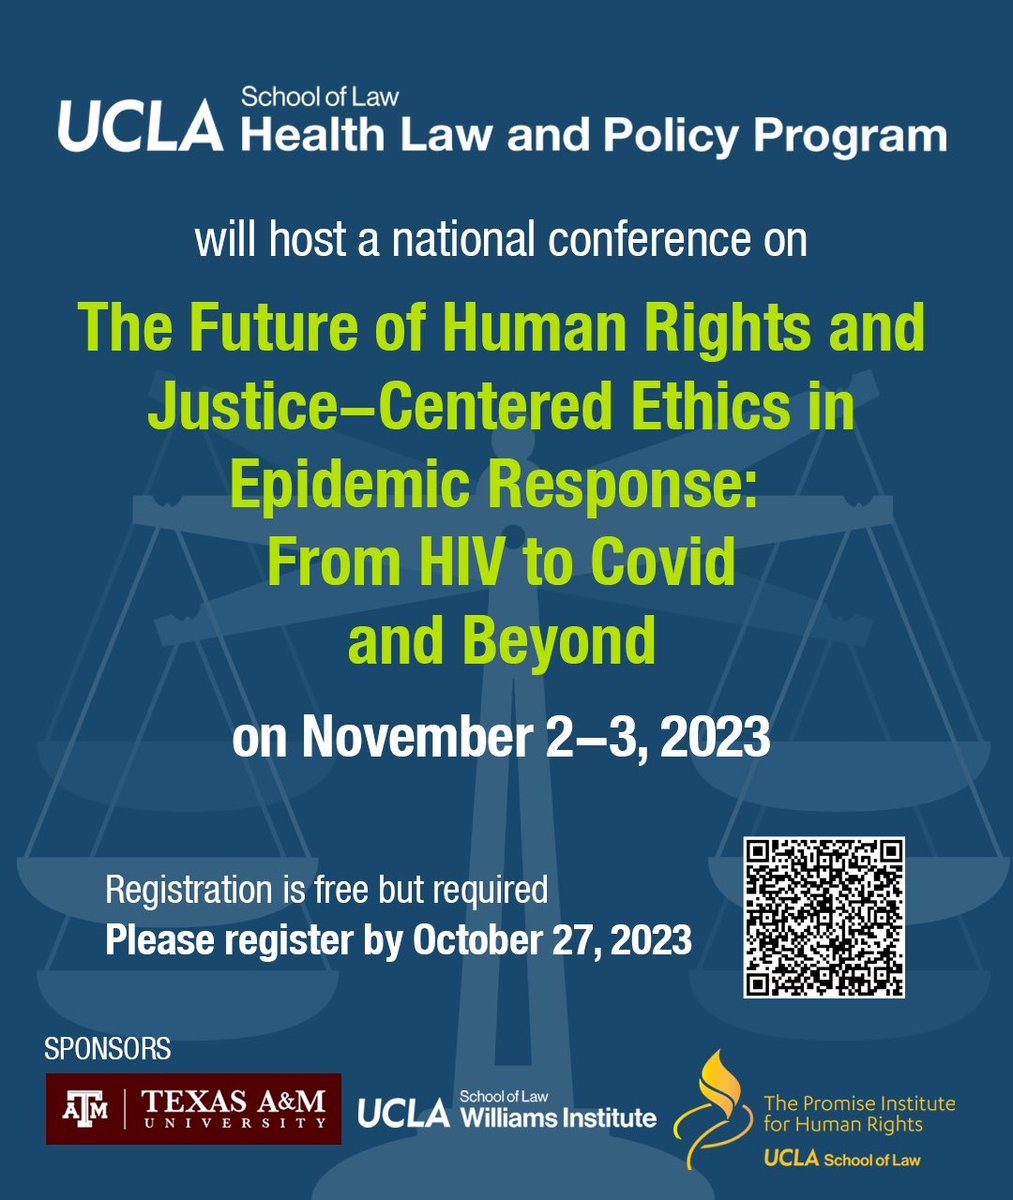 Looking forward to co-chairing this conference at UCLA next month with Bill Sage! Agenda and registration link for virtual or in-person attendance here: law.ucla.edu/academics/cent…